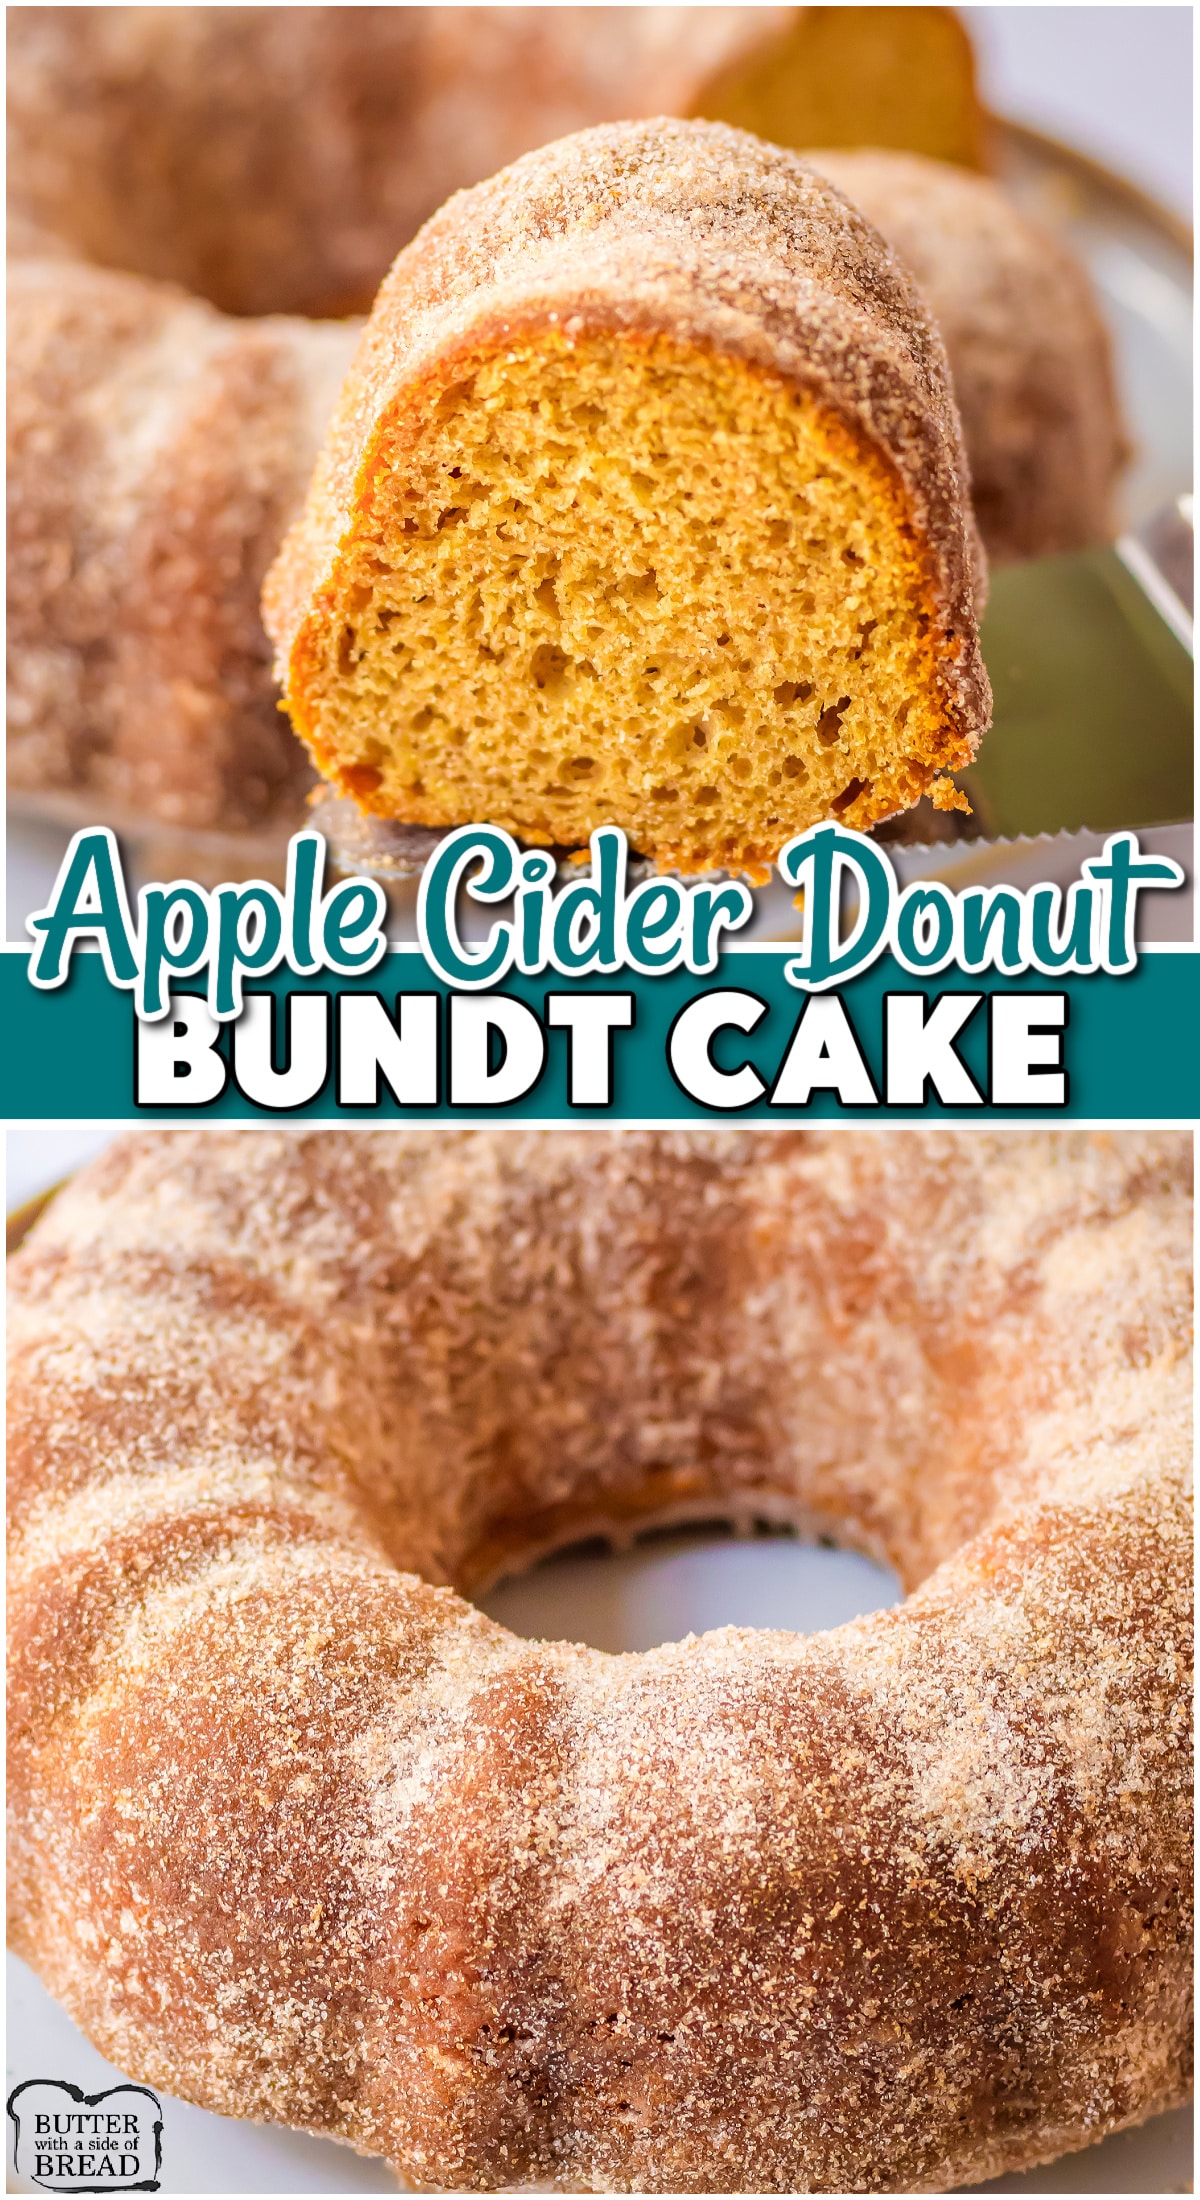 Apple Cider Donut Bundt Cake has all the flavor of your favorite apple cider doughnuts, but in an easy bundt cake! This donut cake recipe uses cake mix, mixed with apple cider dusted with cinnamon sugar!